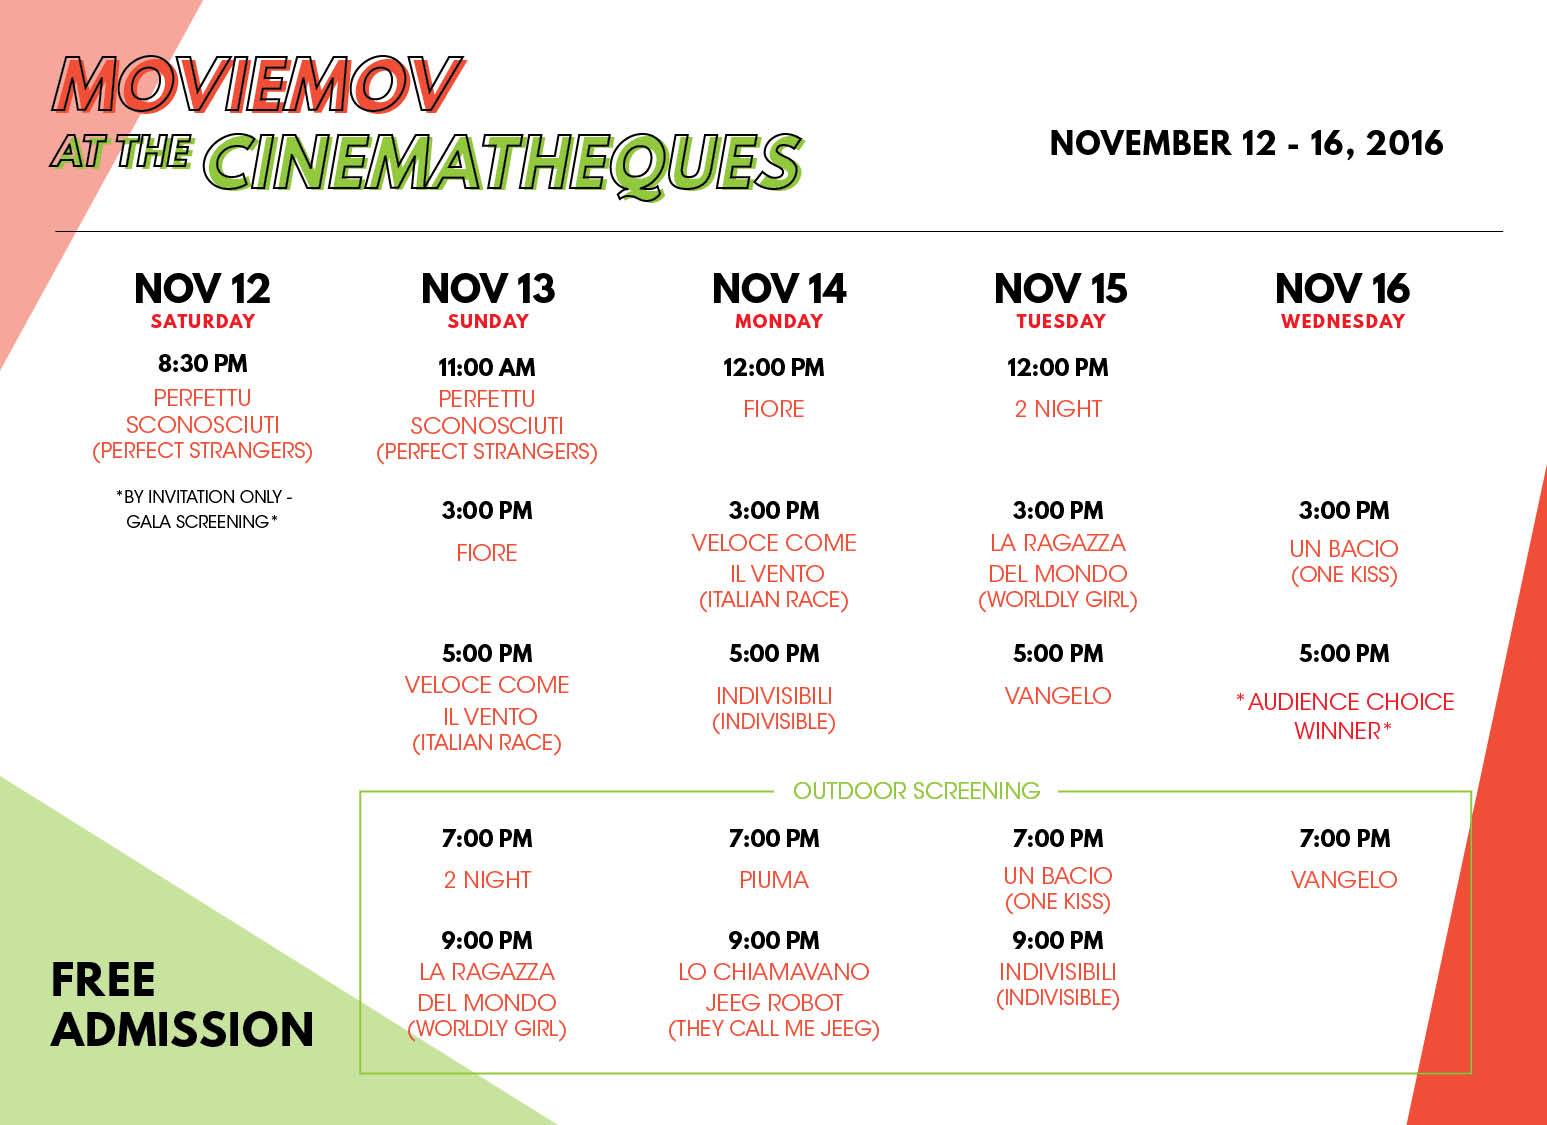 Cinematheque‎Moviemov: Italian Film Festival 2016 Follow · November 8 · Ciao! To those who missed the screening schedules for the #ItalianCinemaNow, here it is again! See you at the Cinematheque Centre Manila! :) — at Cinematheque Centre Manila.